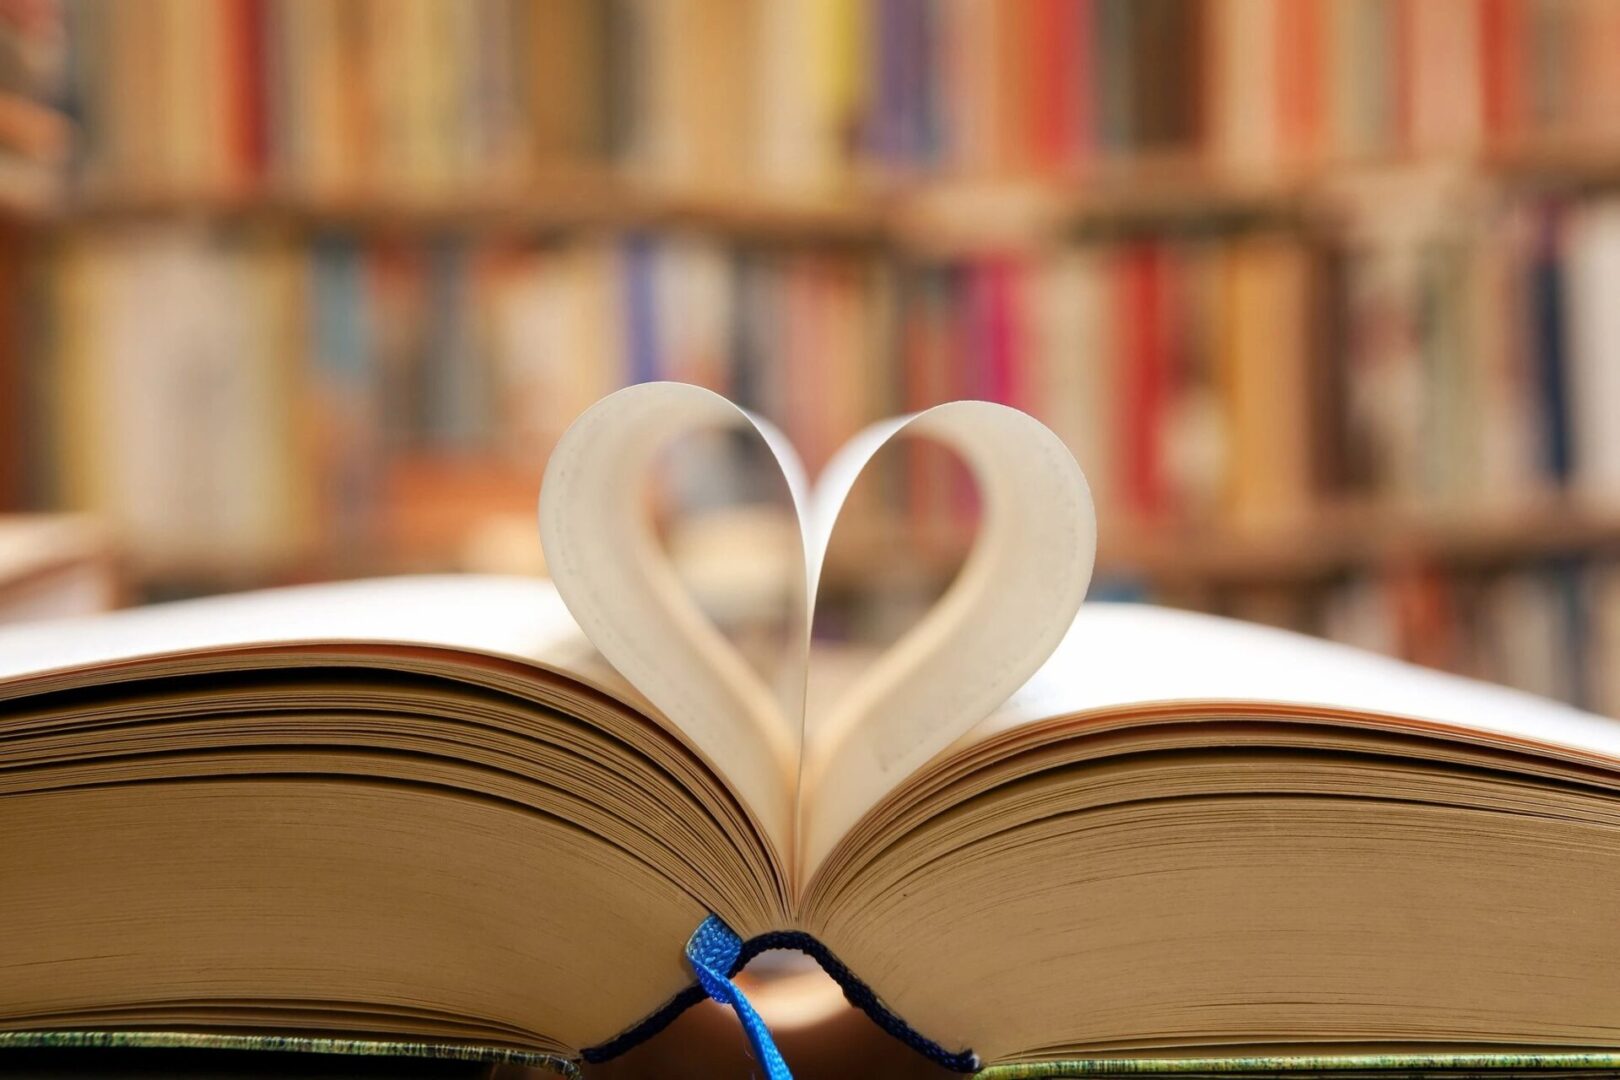 A book with an open heart shaped page.